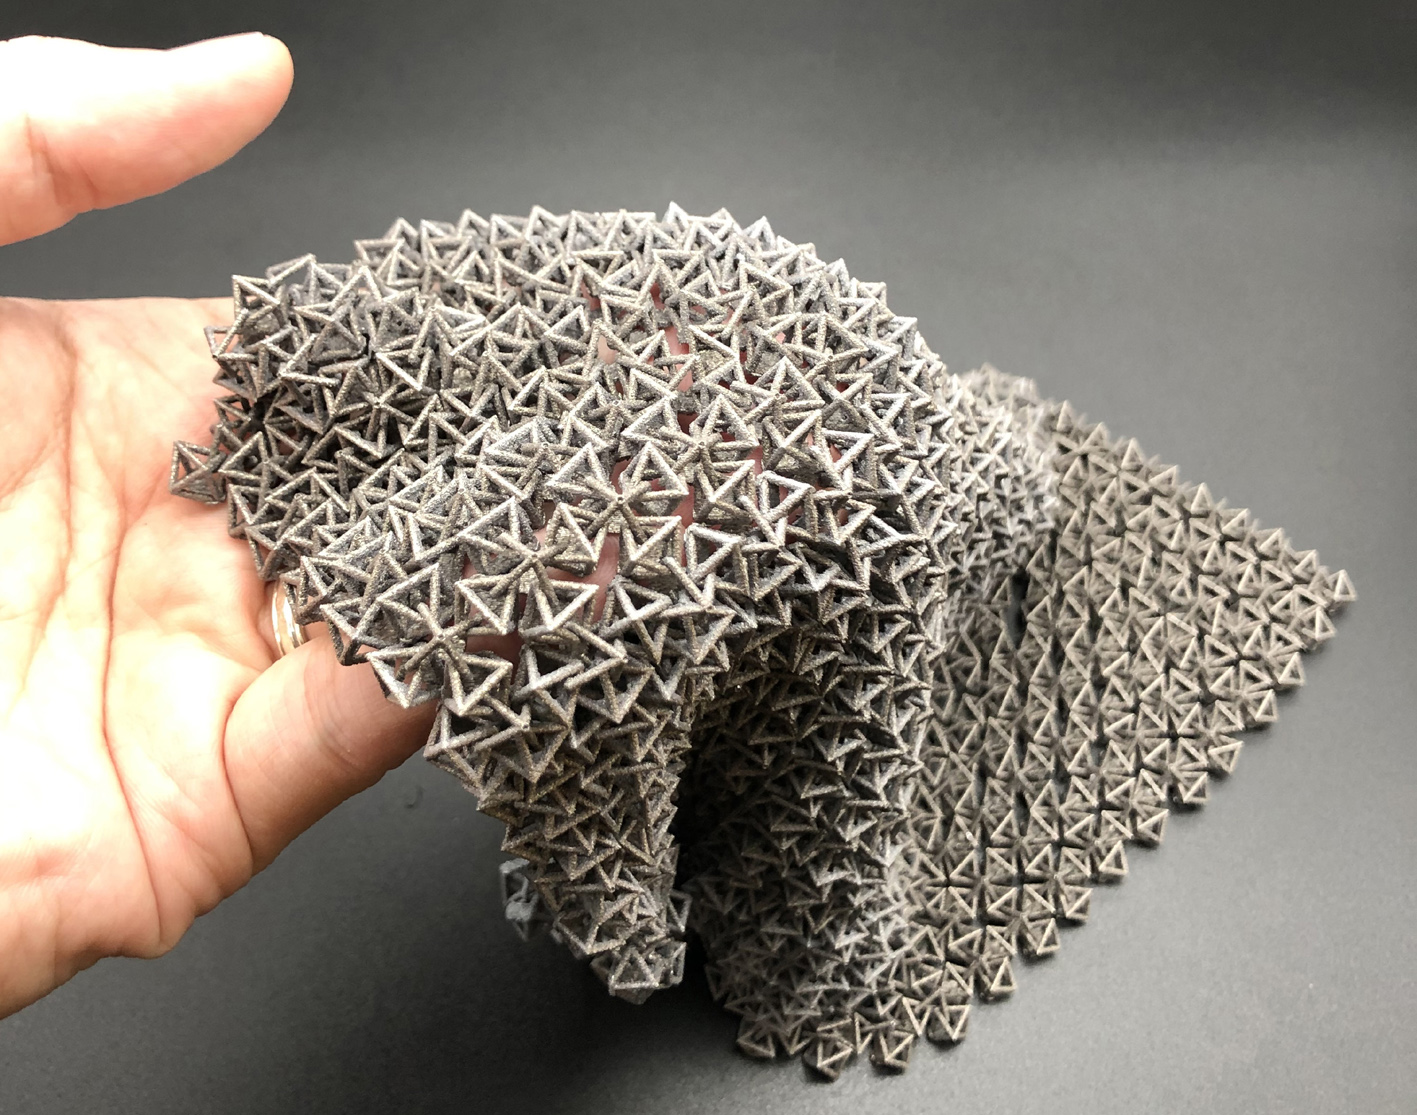 The team has also 3D-printed the chain mail in aluminium, which has more tensile strength and more suitable for industrial applications. © NTU